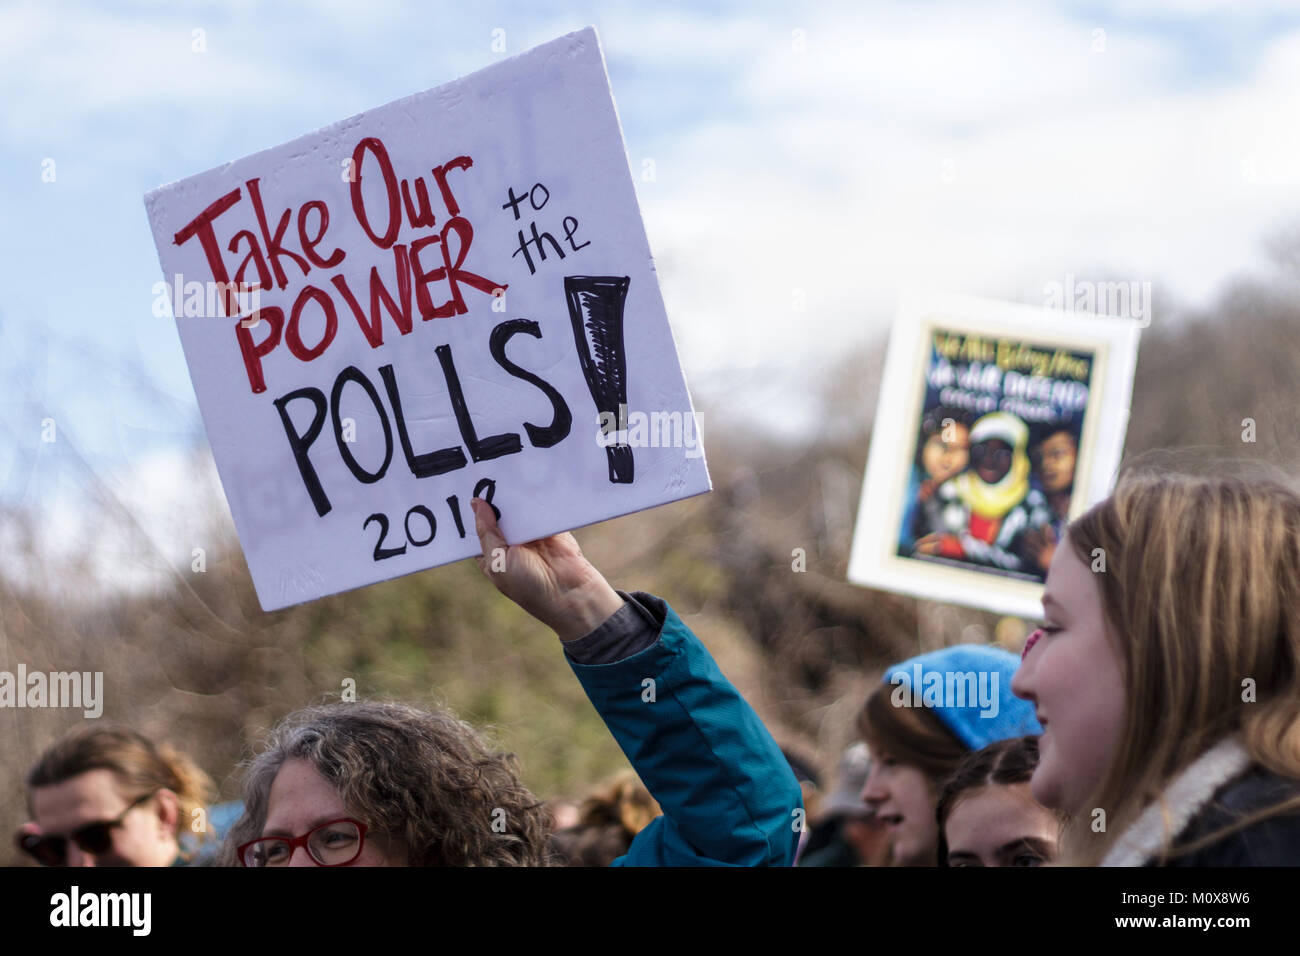 A woman holds up a sigh that says 'Take our power to the polls! 2018' at the Women's March Stock Photo